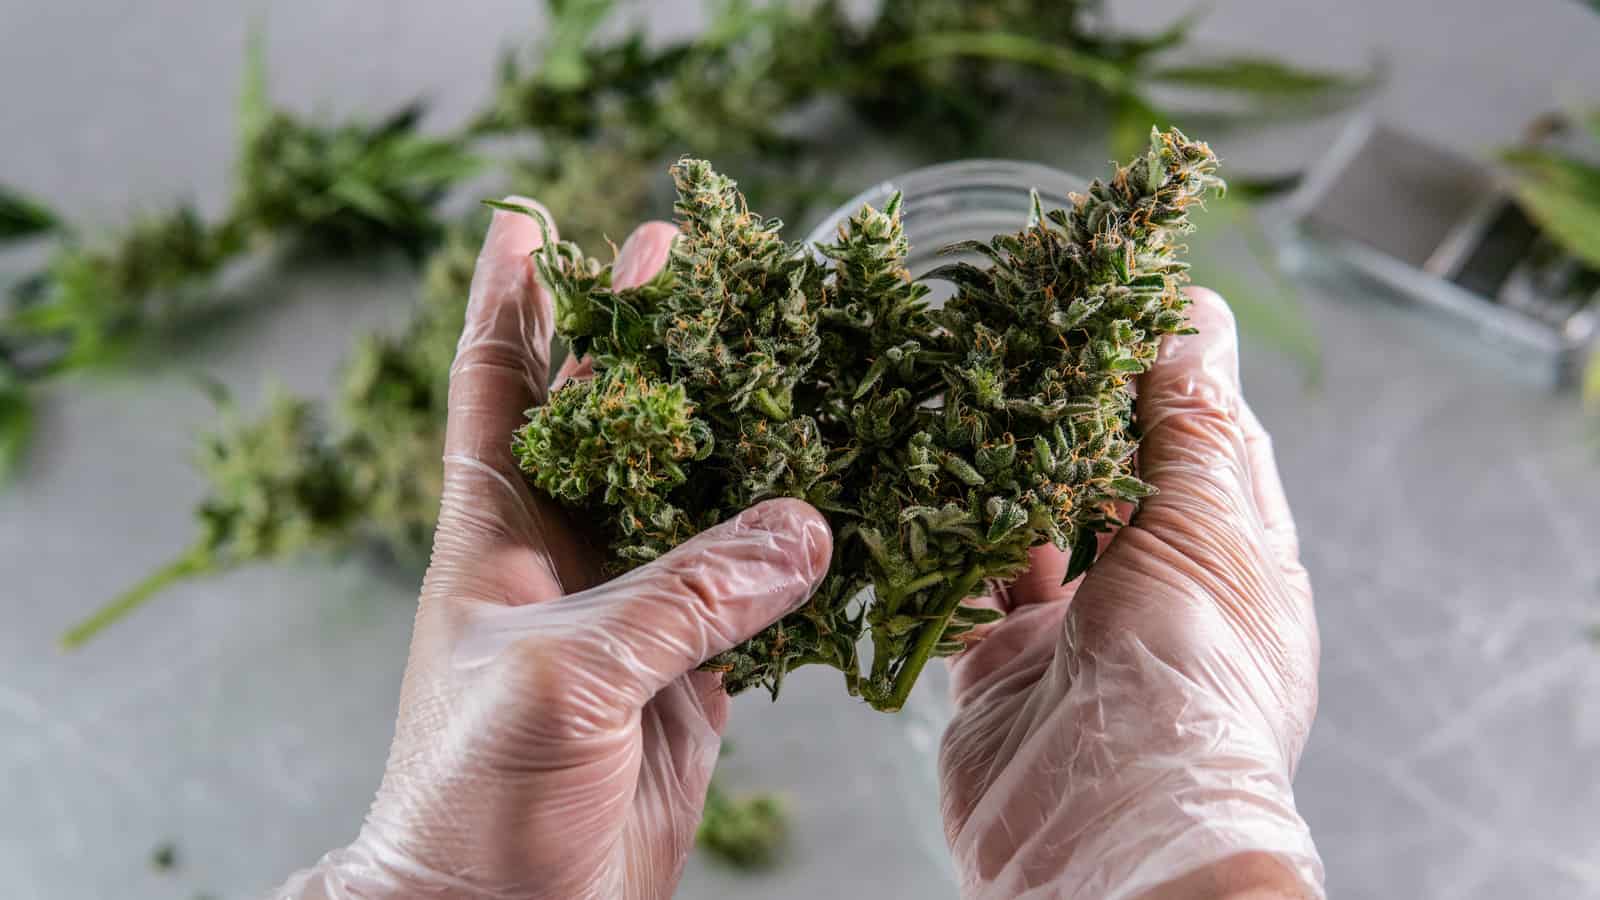 A Job Seeker's Guide to Colorado Cannabis Jobs and Careers. Gloved hands holding marijuana.